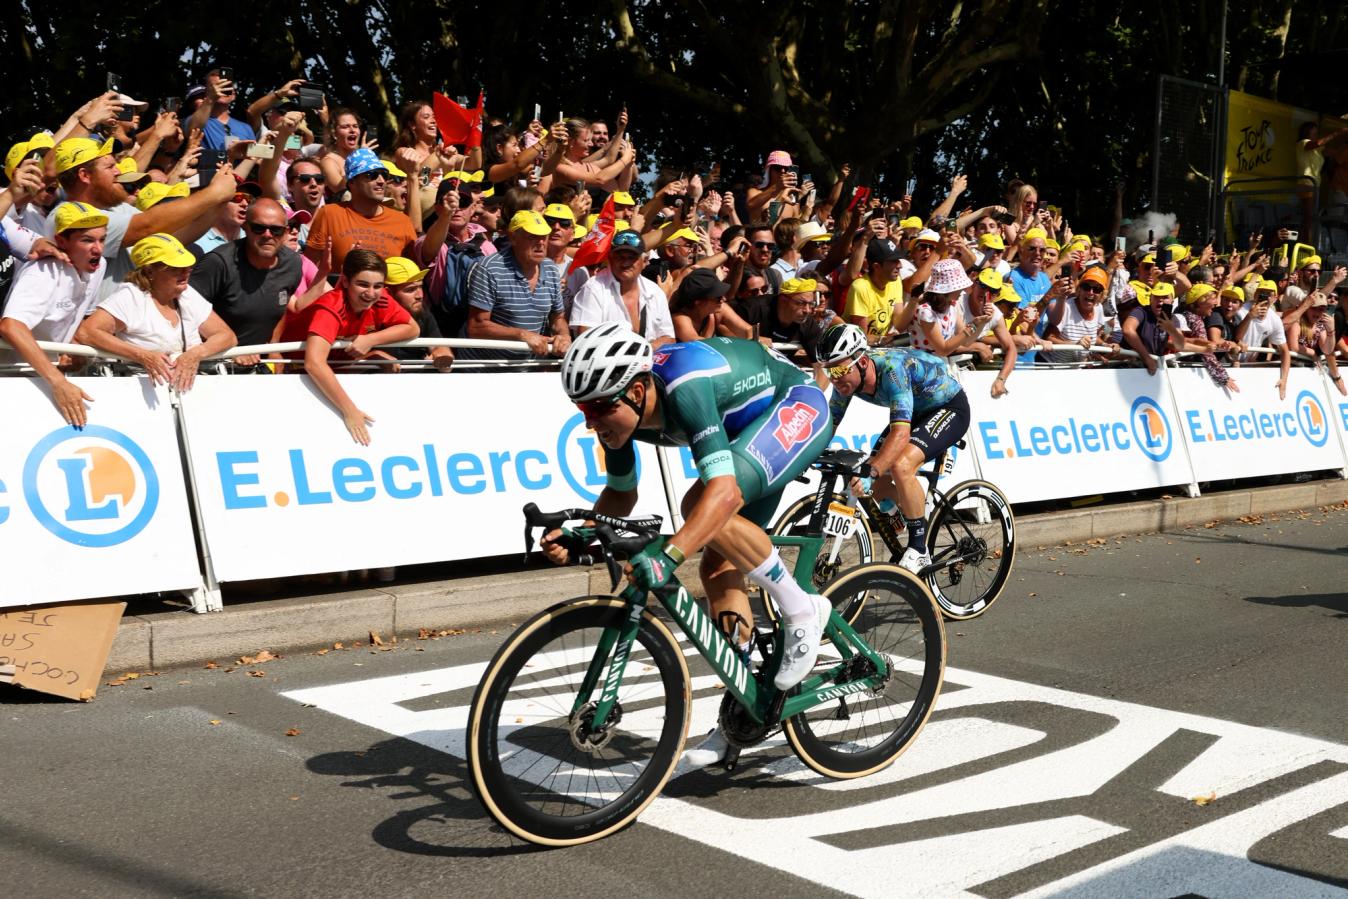 Mark Cavendish looked set to win stage 7 of this year's Tour de France, before a mechanical opened the door for Jasper Philipsen